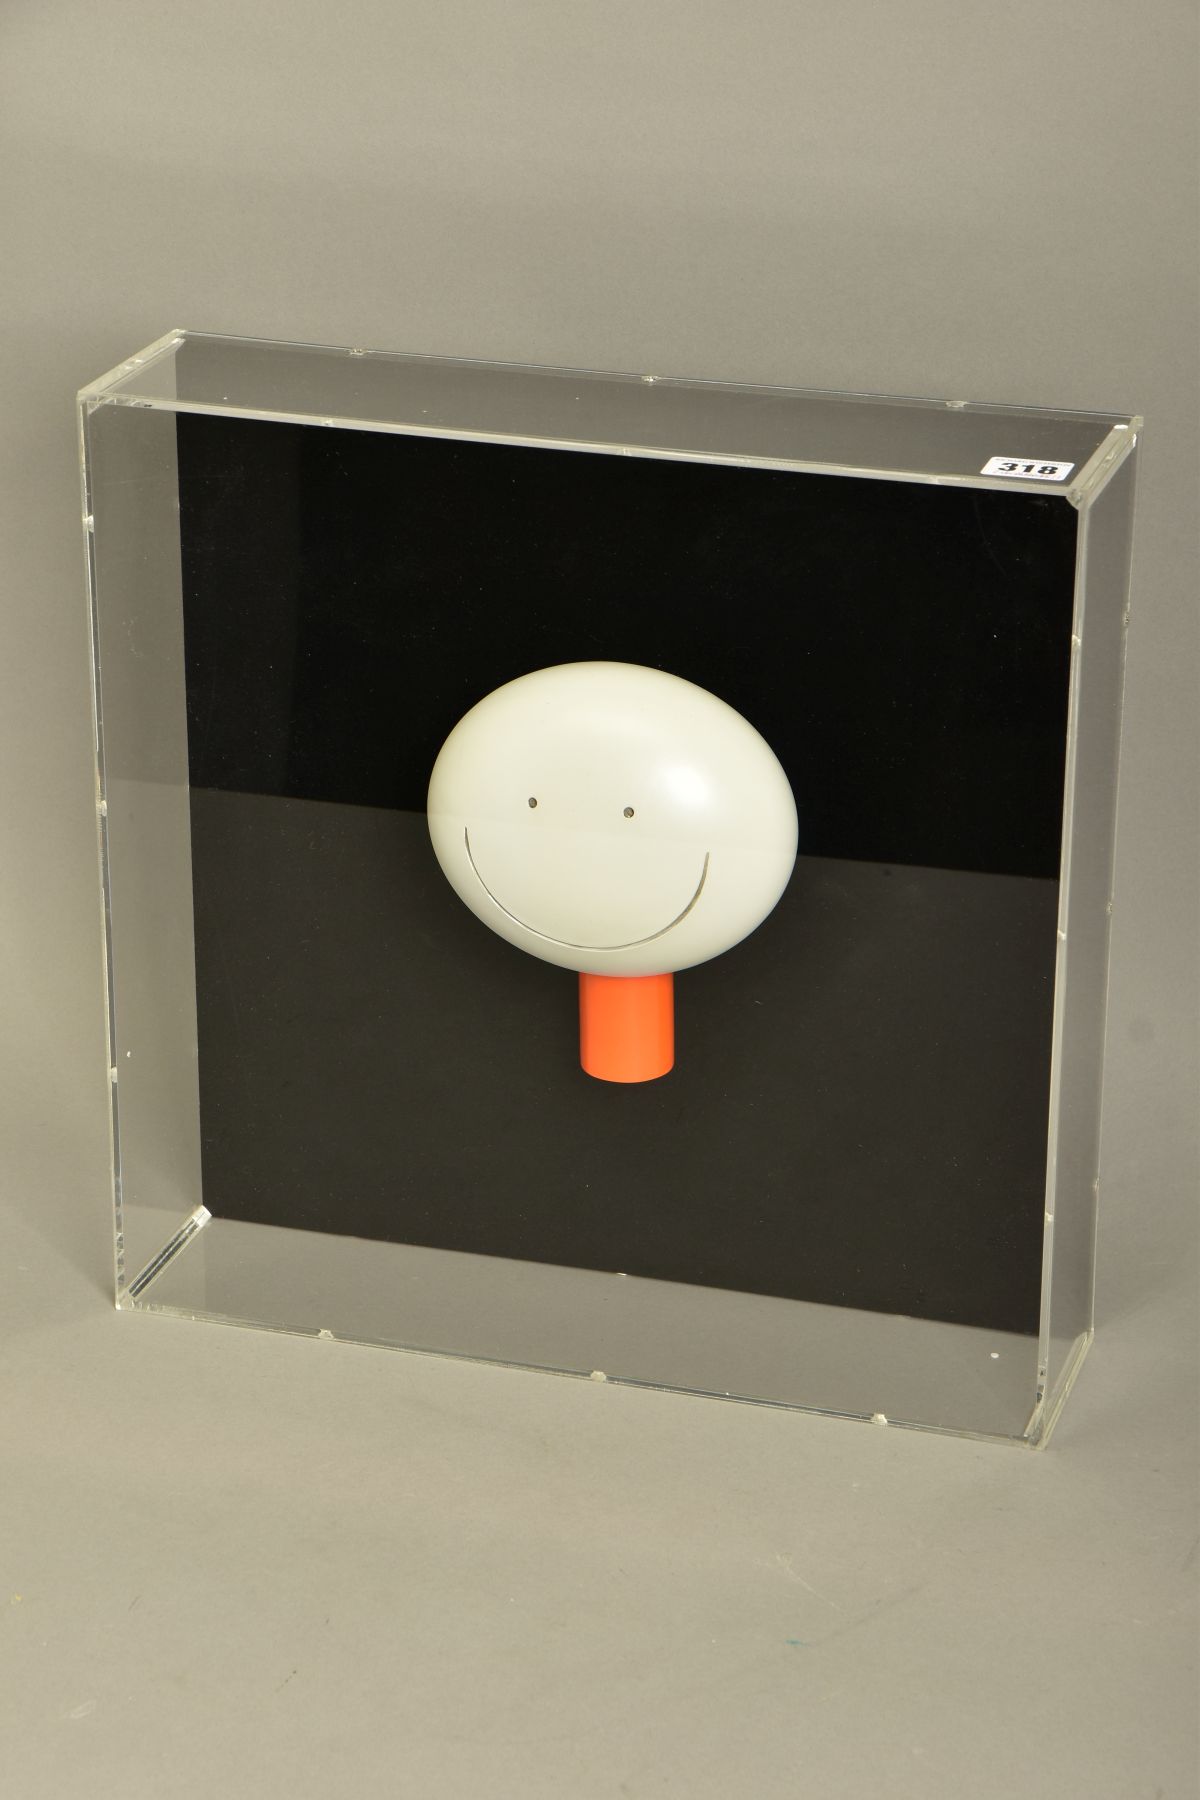 DOUG HYDE (BRITISH 1972) 'THE SMILE' a sculpture of a smiling face mounted inside a perspex box, - Image 3 of 5